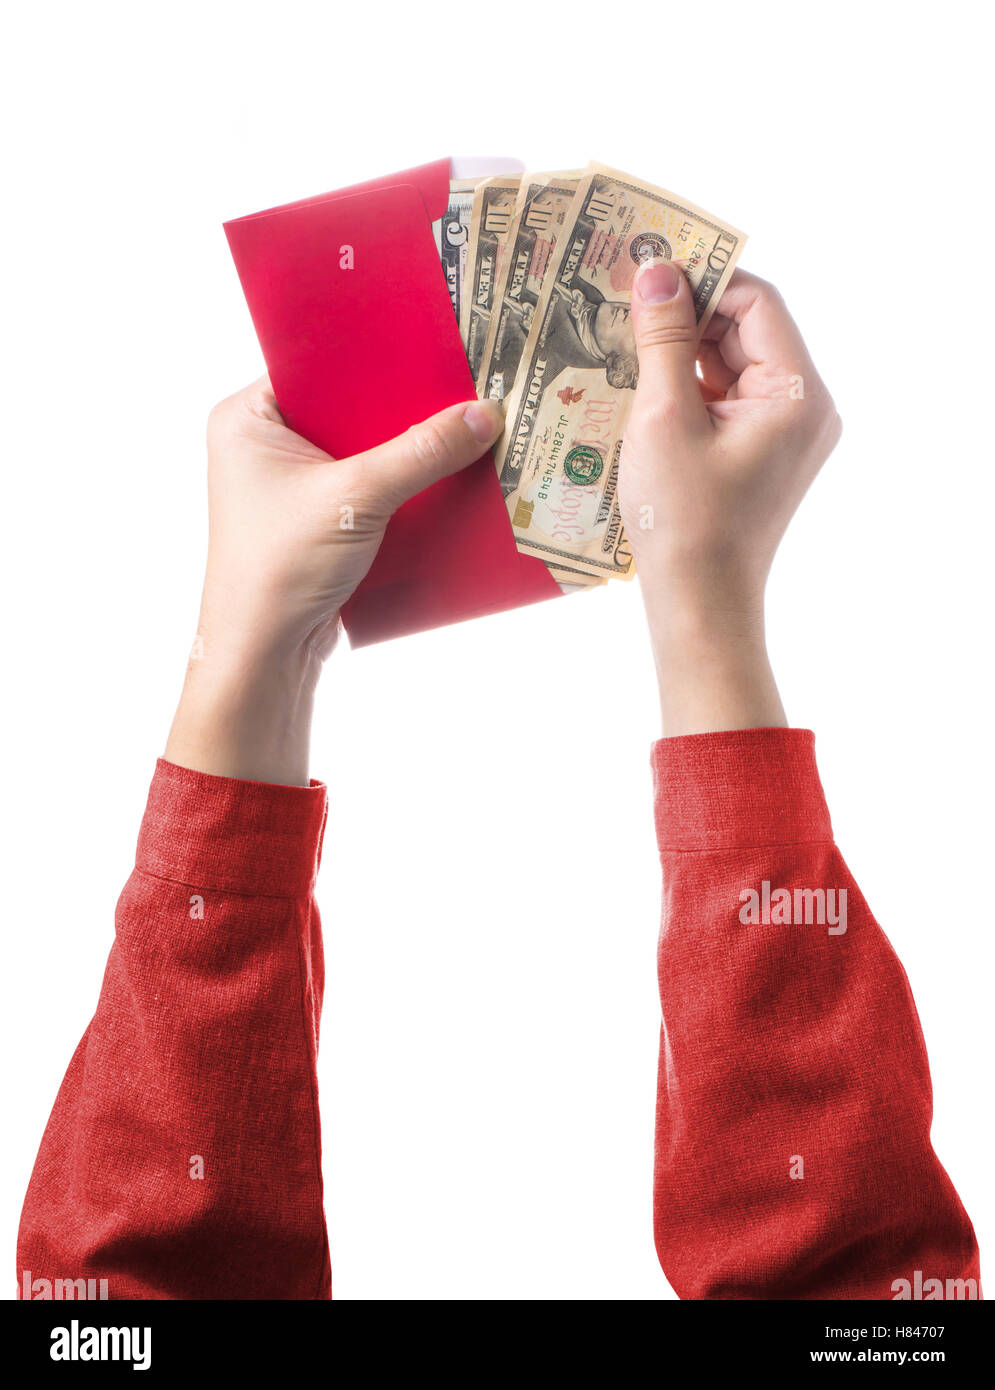 Money Cash in Red Envelope isolated on White Background. Chinese